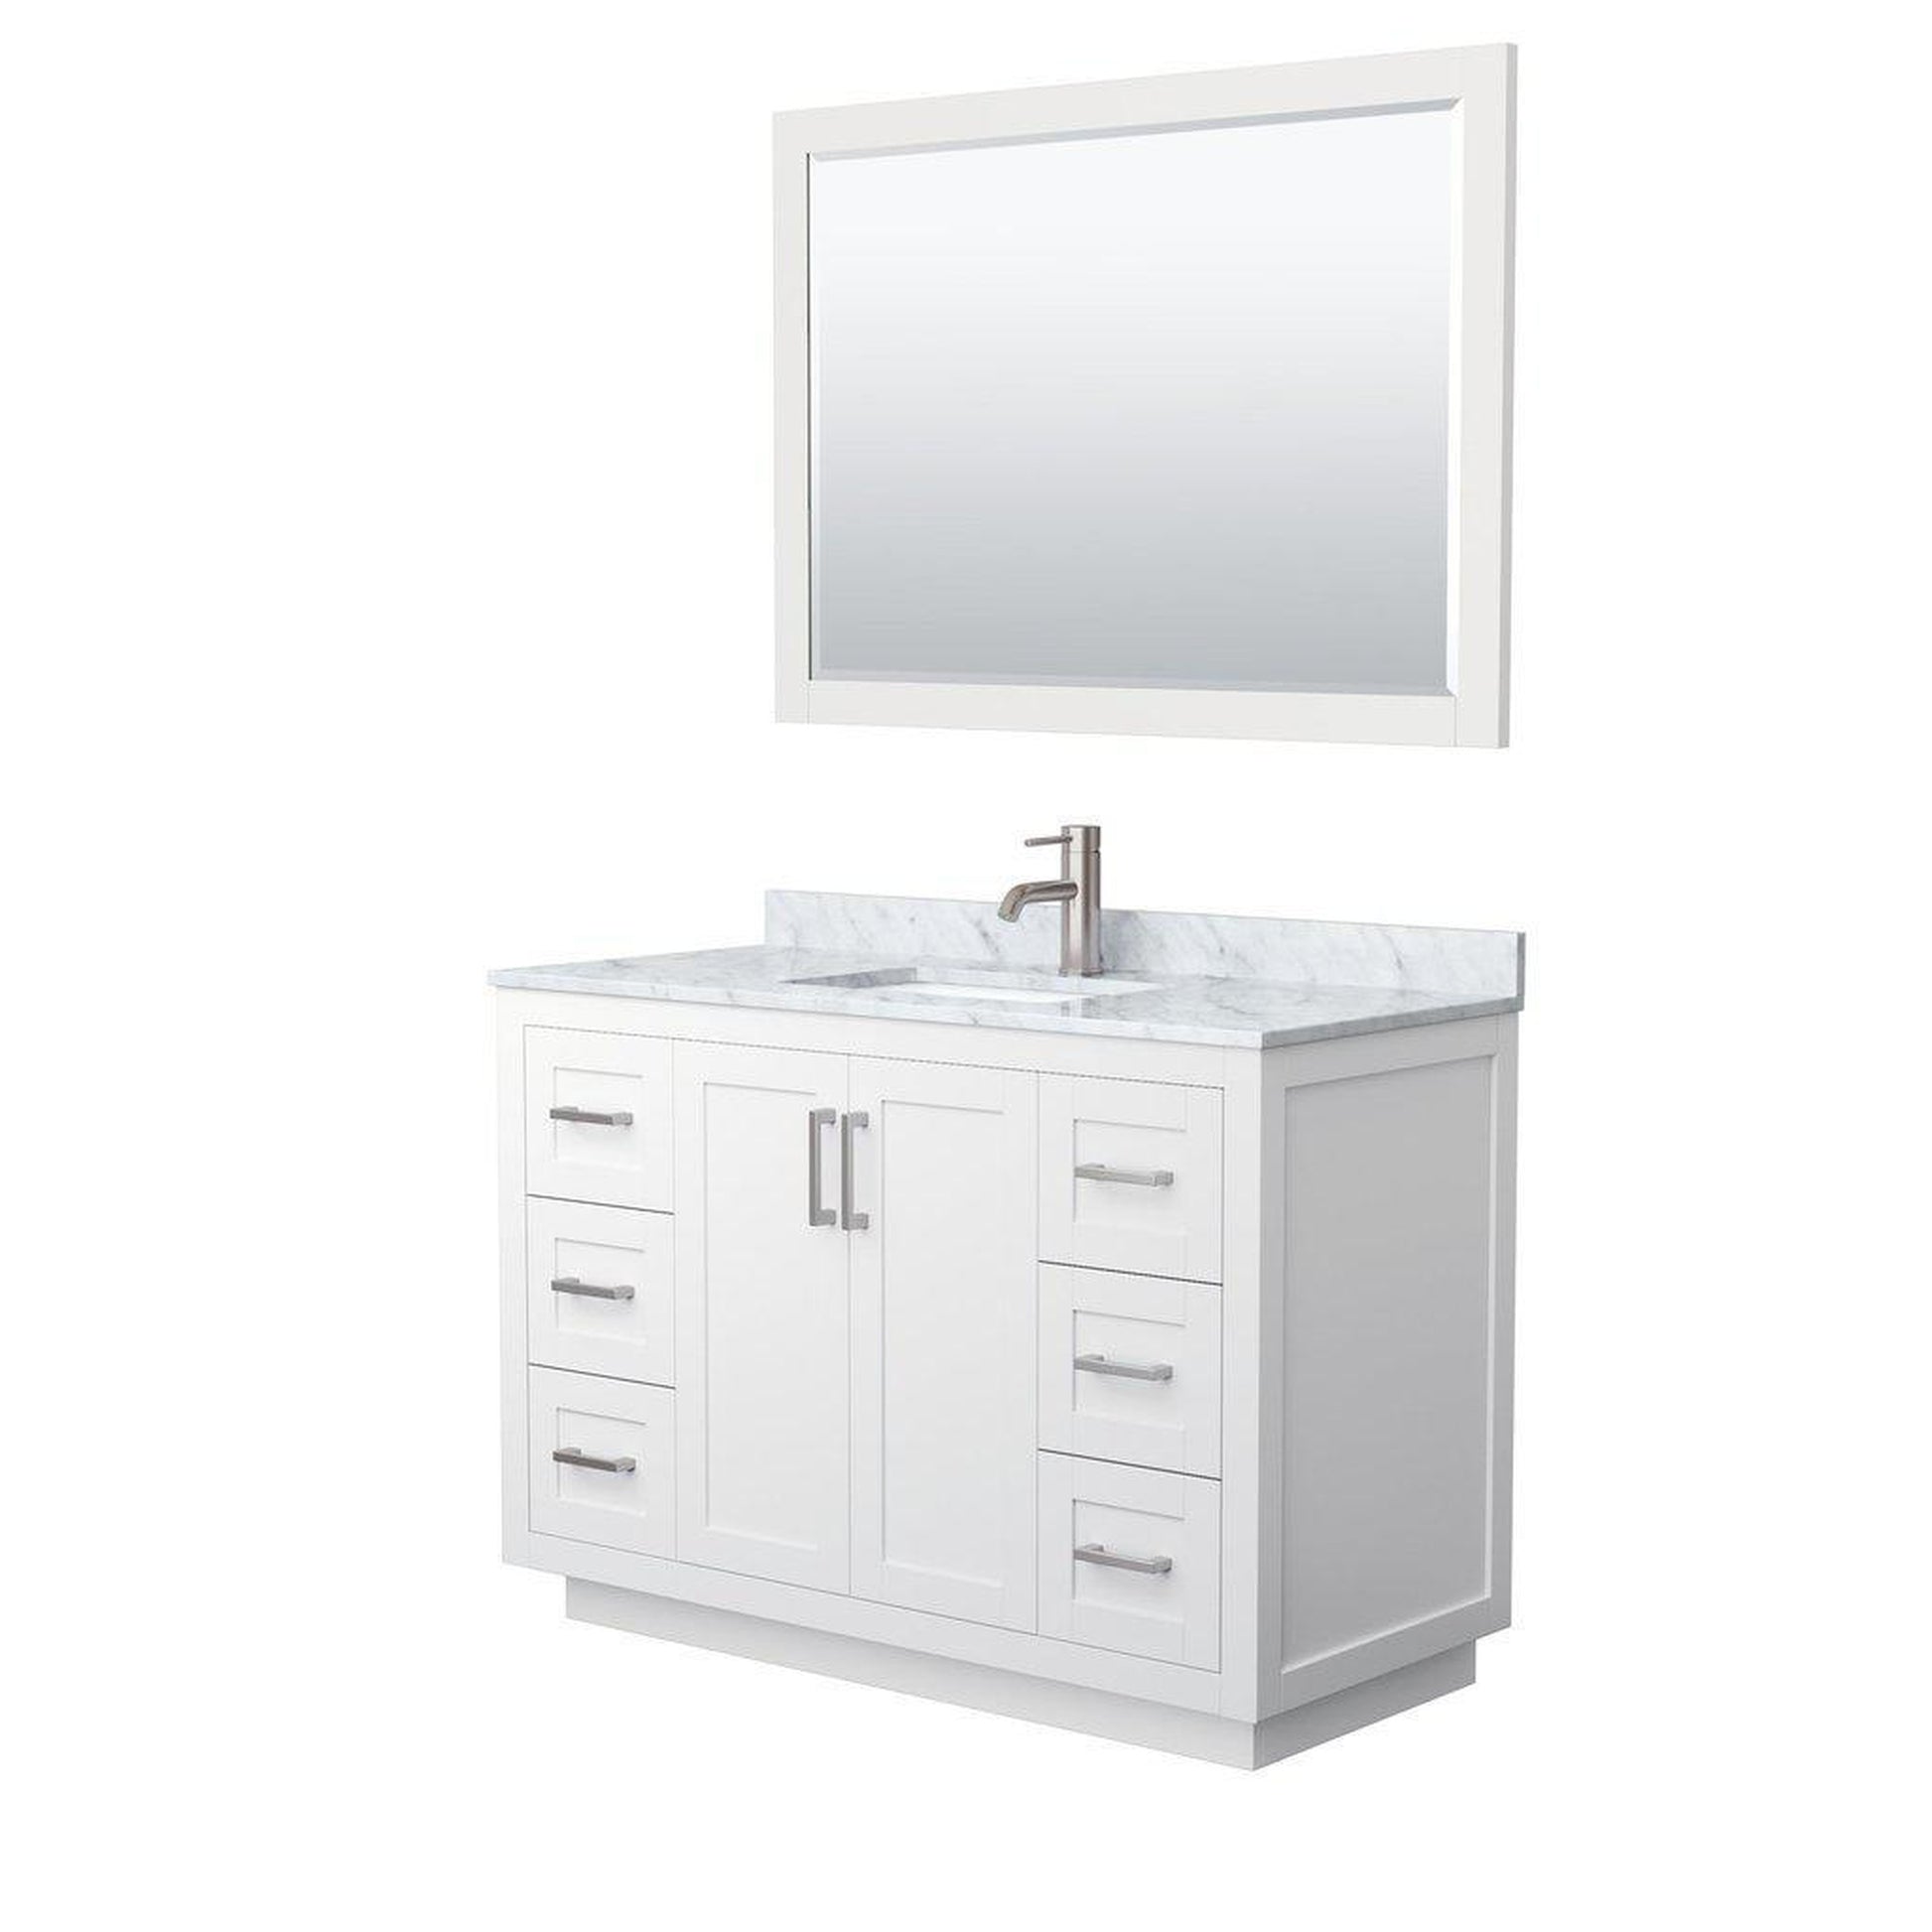 Wyndham Collection Miranda 48" Single Bathroom White Vanity Set With White Carrara Marble Countertop, Undermount Square Sink, 46" Mirror And Brushed Nickel Trim